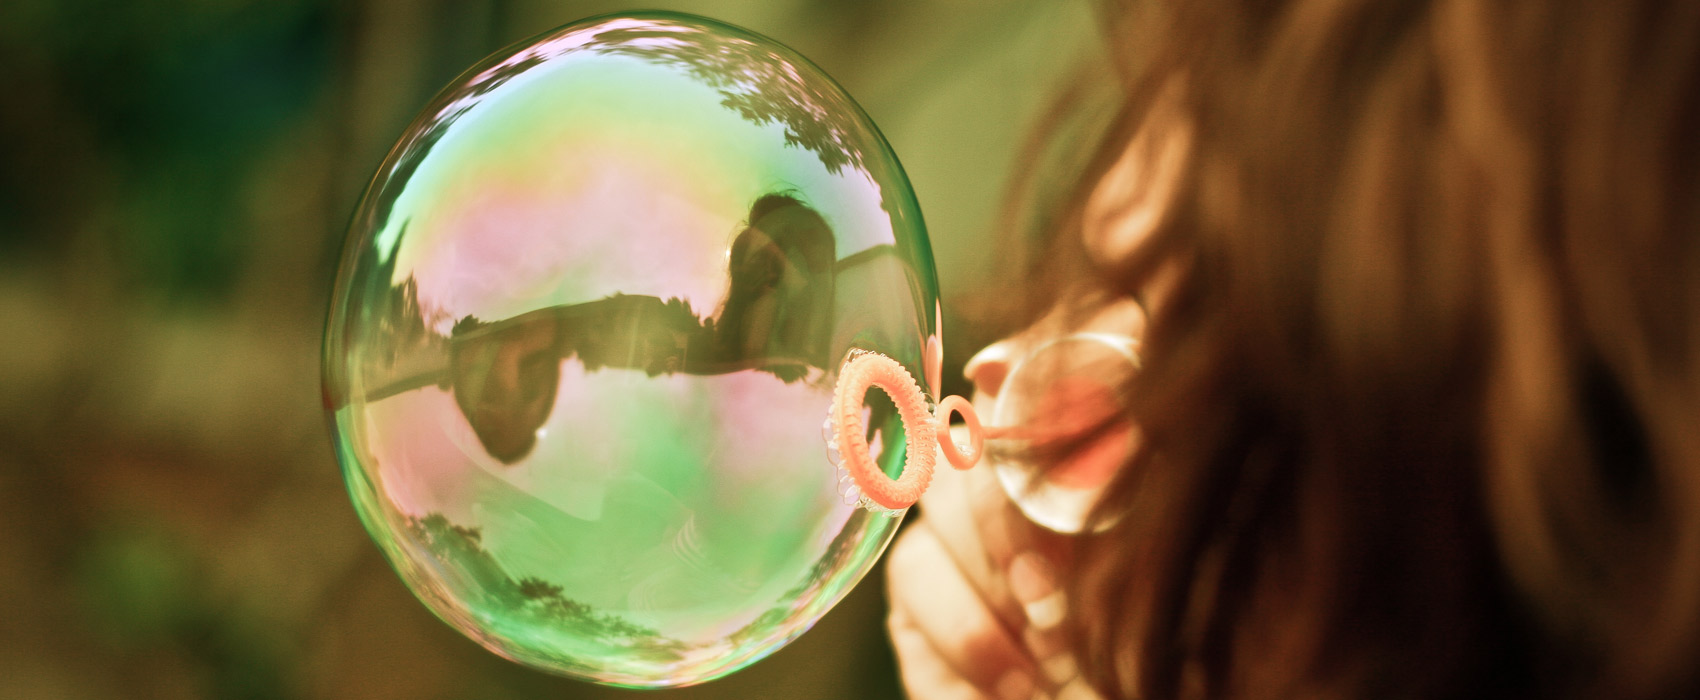 Girl and bubble